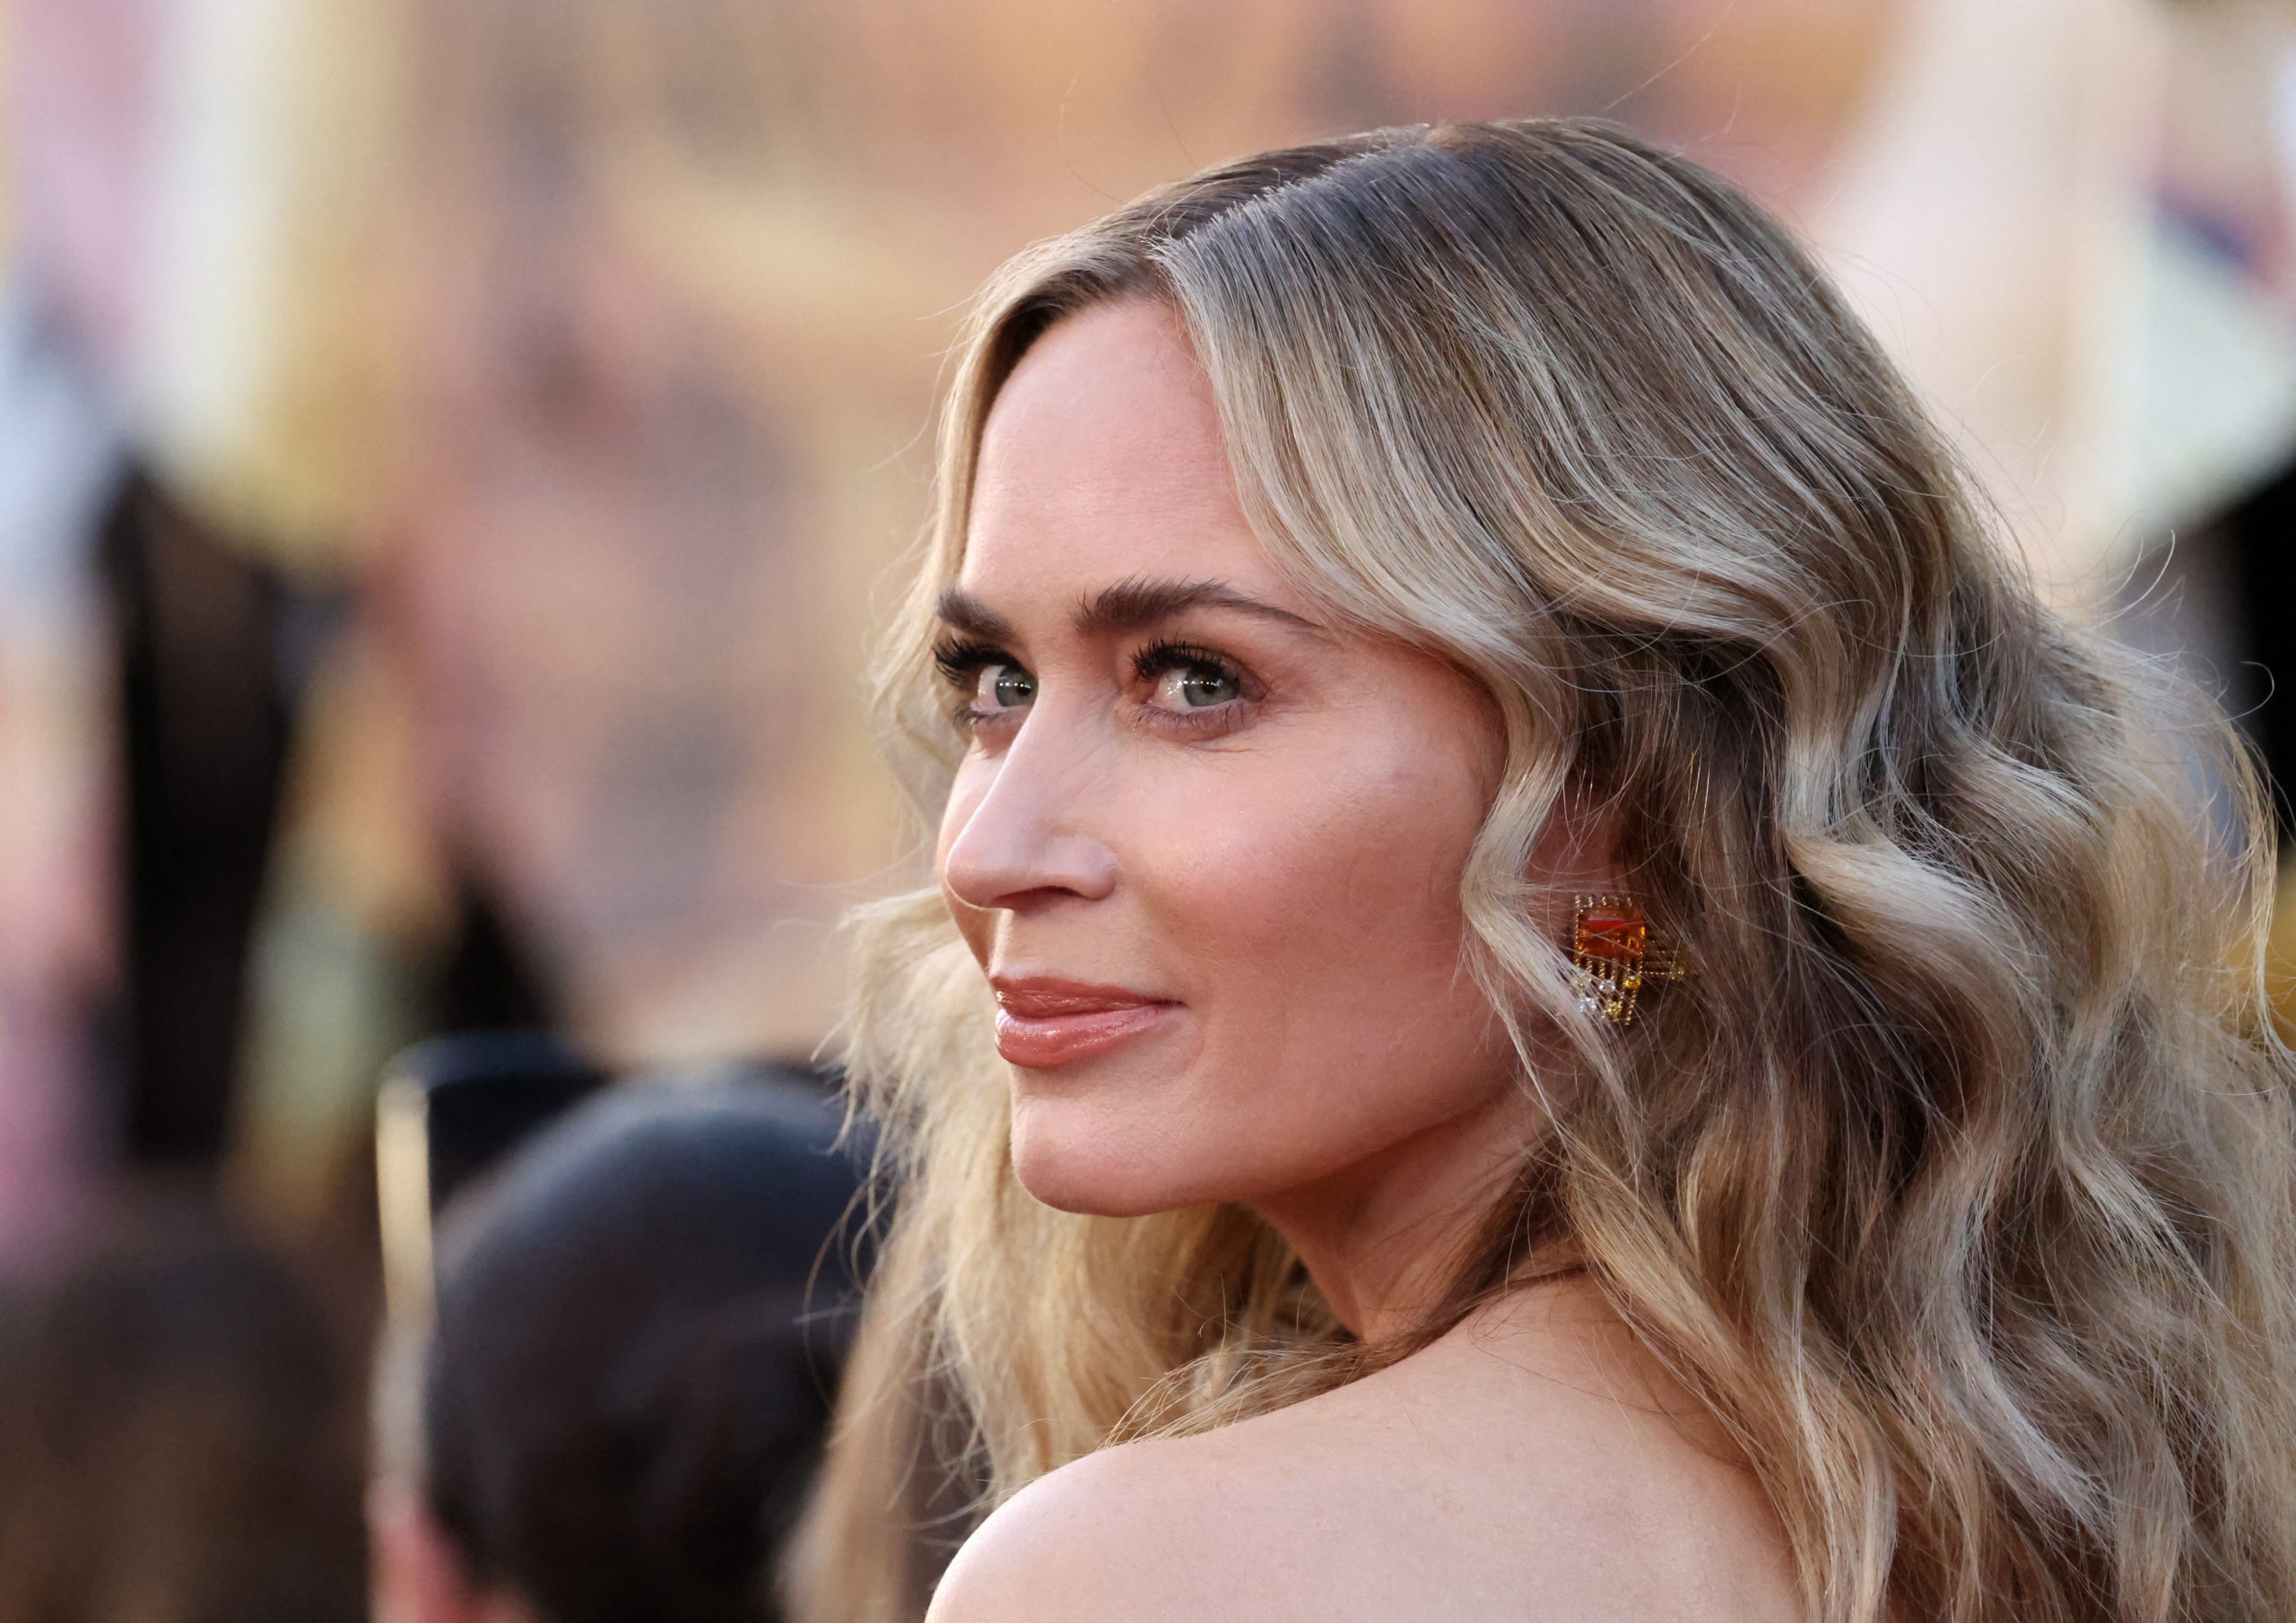 Cast member Emily Blunt attends a premiere for the film "The Fall Guy" in Los Angeles, California, U.S. April 30, 2024. REUTERS/Mario Anzuoni REFILE - CORRECTING ID FROM "TERESA PALMER" TO "EMILY BLUNT